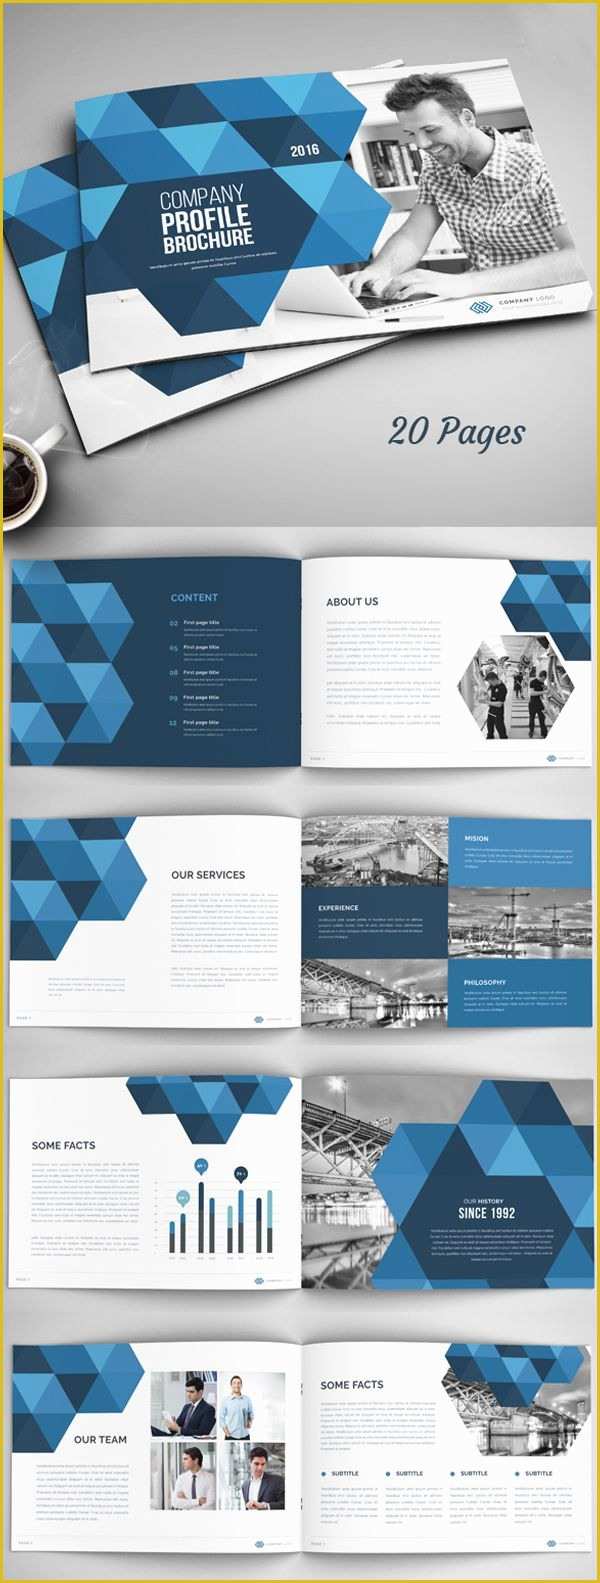 Free E Brochure Design Templates Of 20 Pages Annual Report Pany Profile Brochure Template